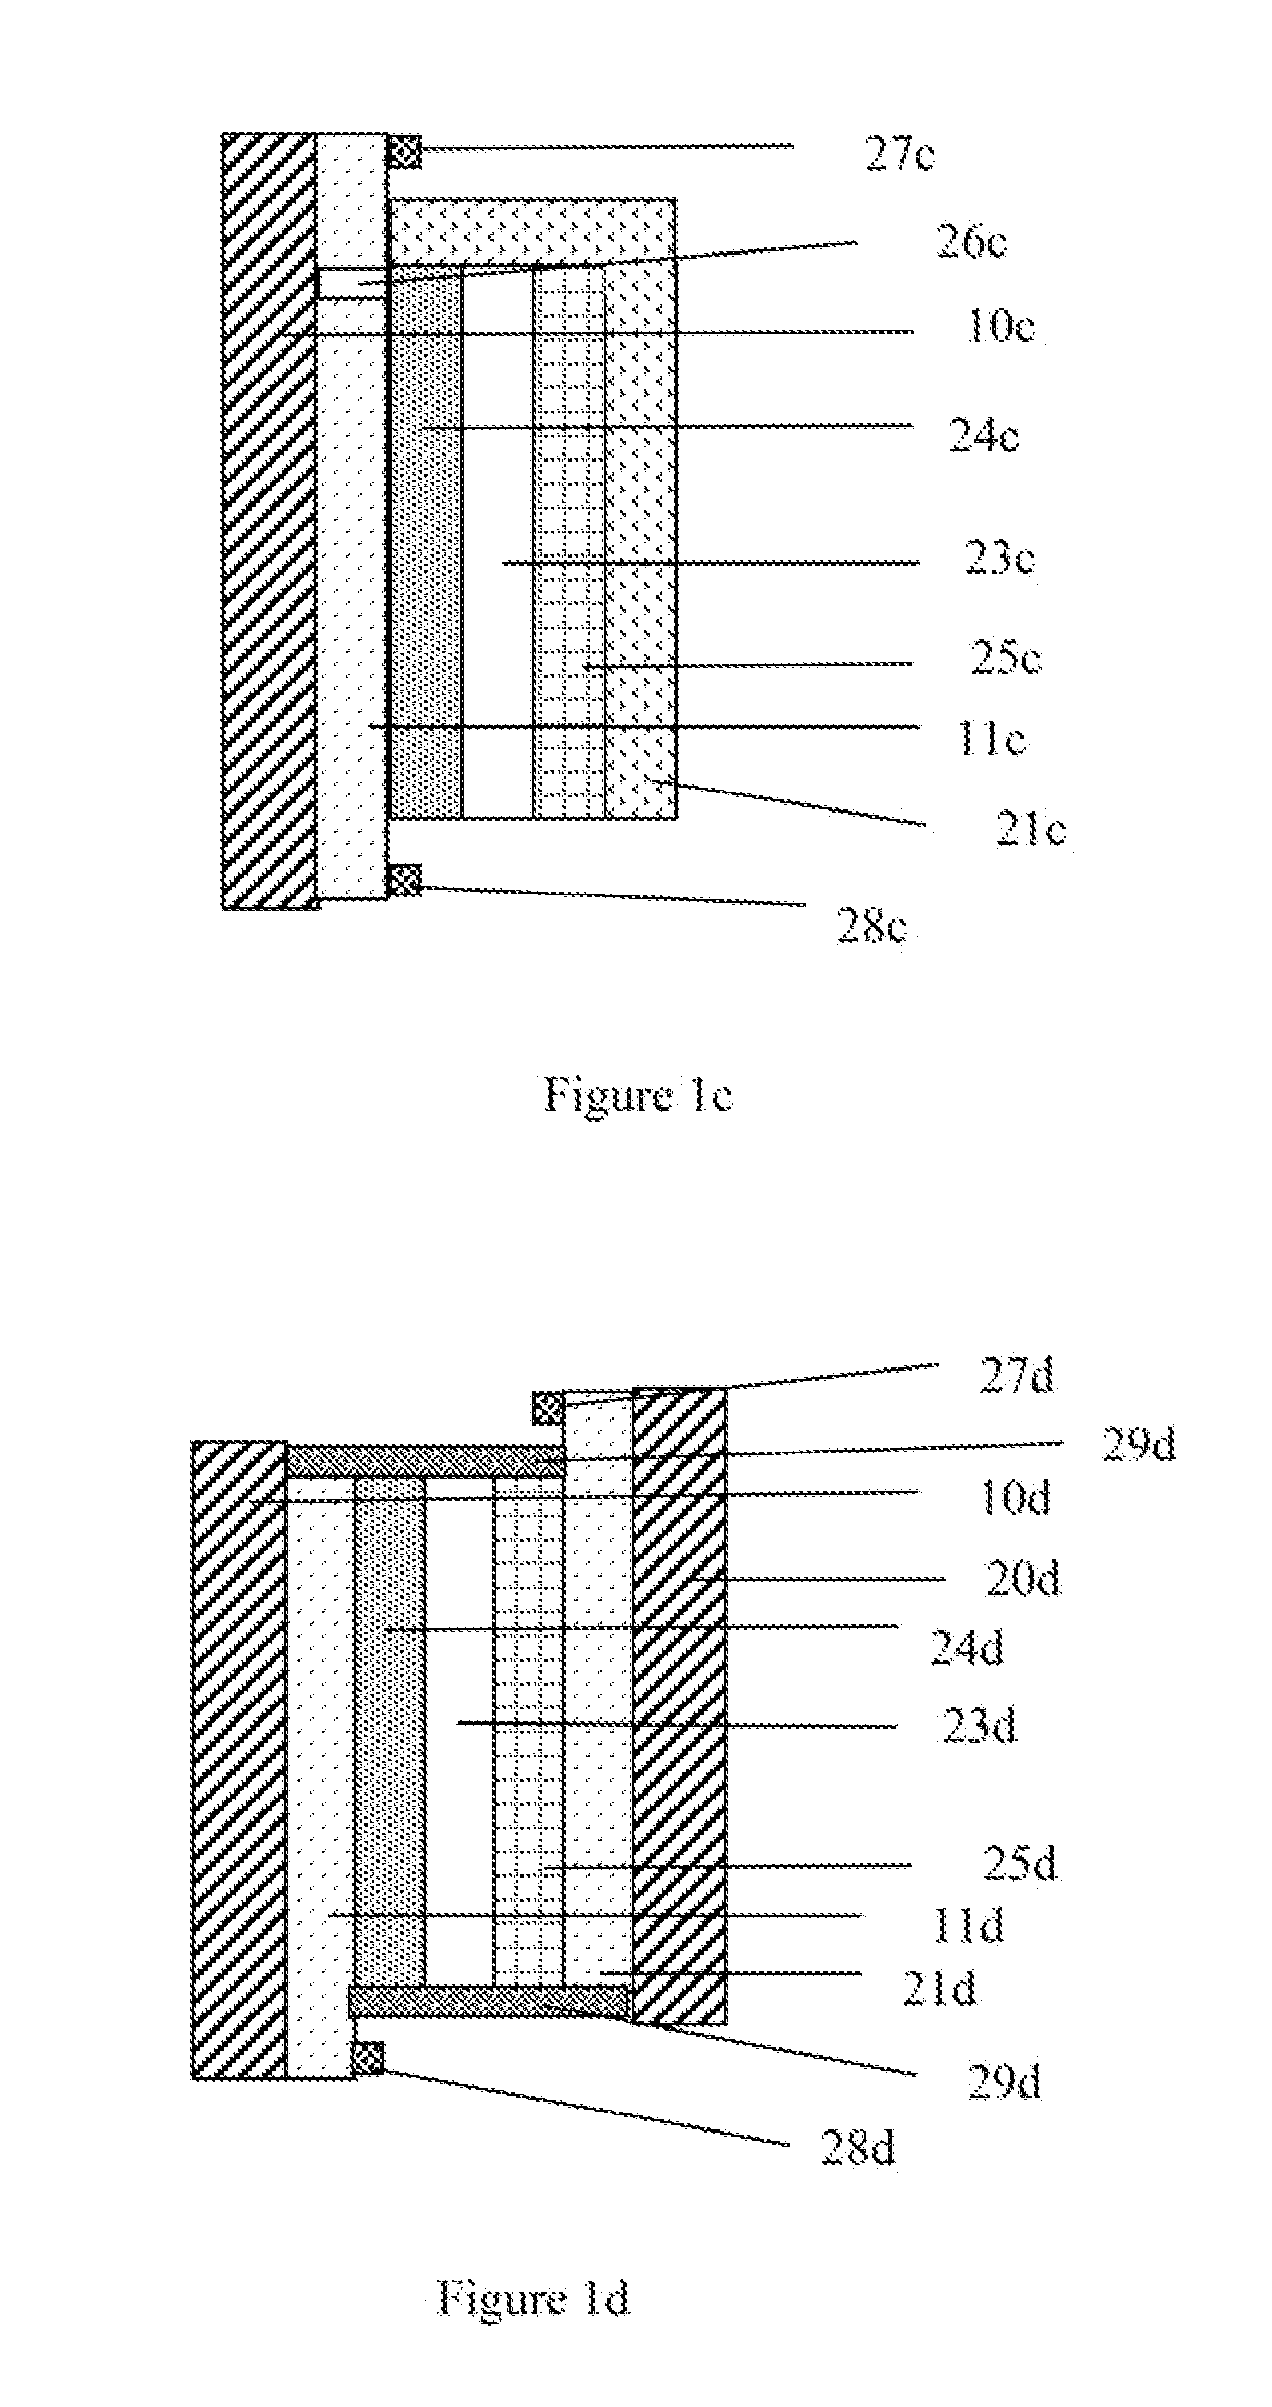 Conductive busbars and sealants for chromogenic devices